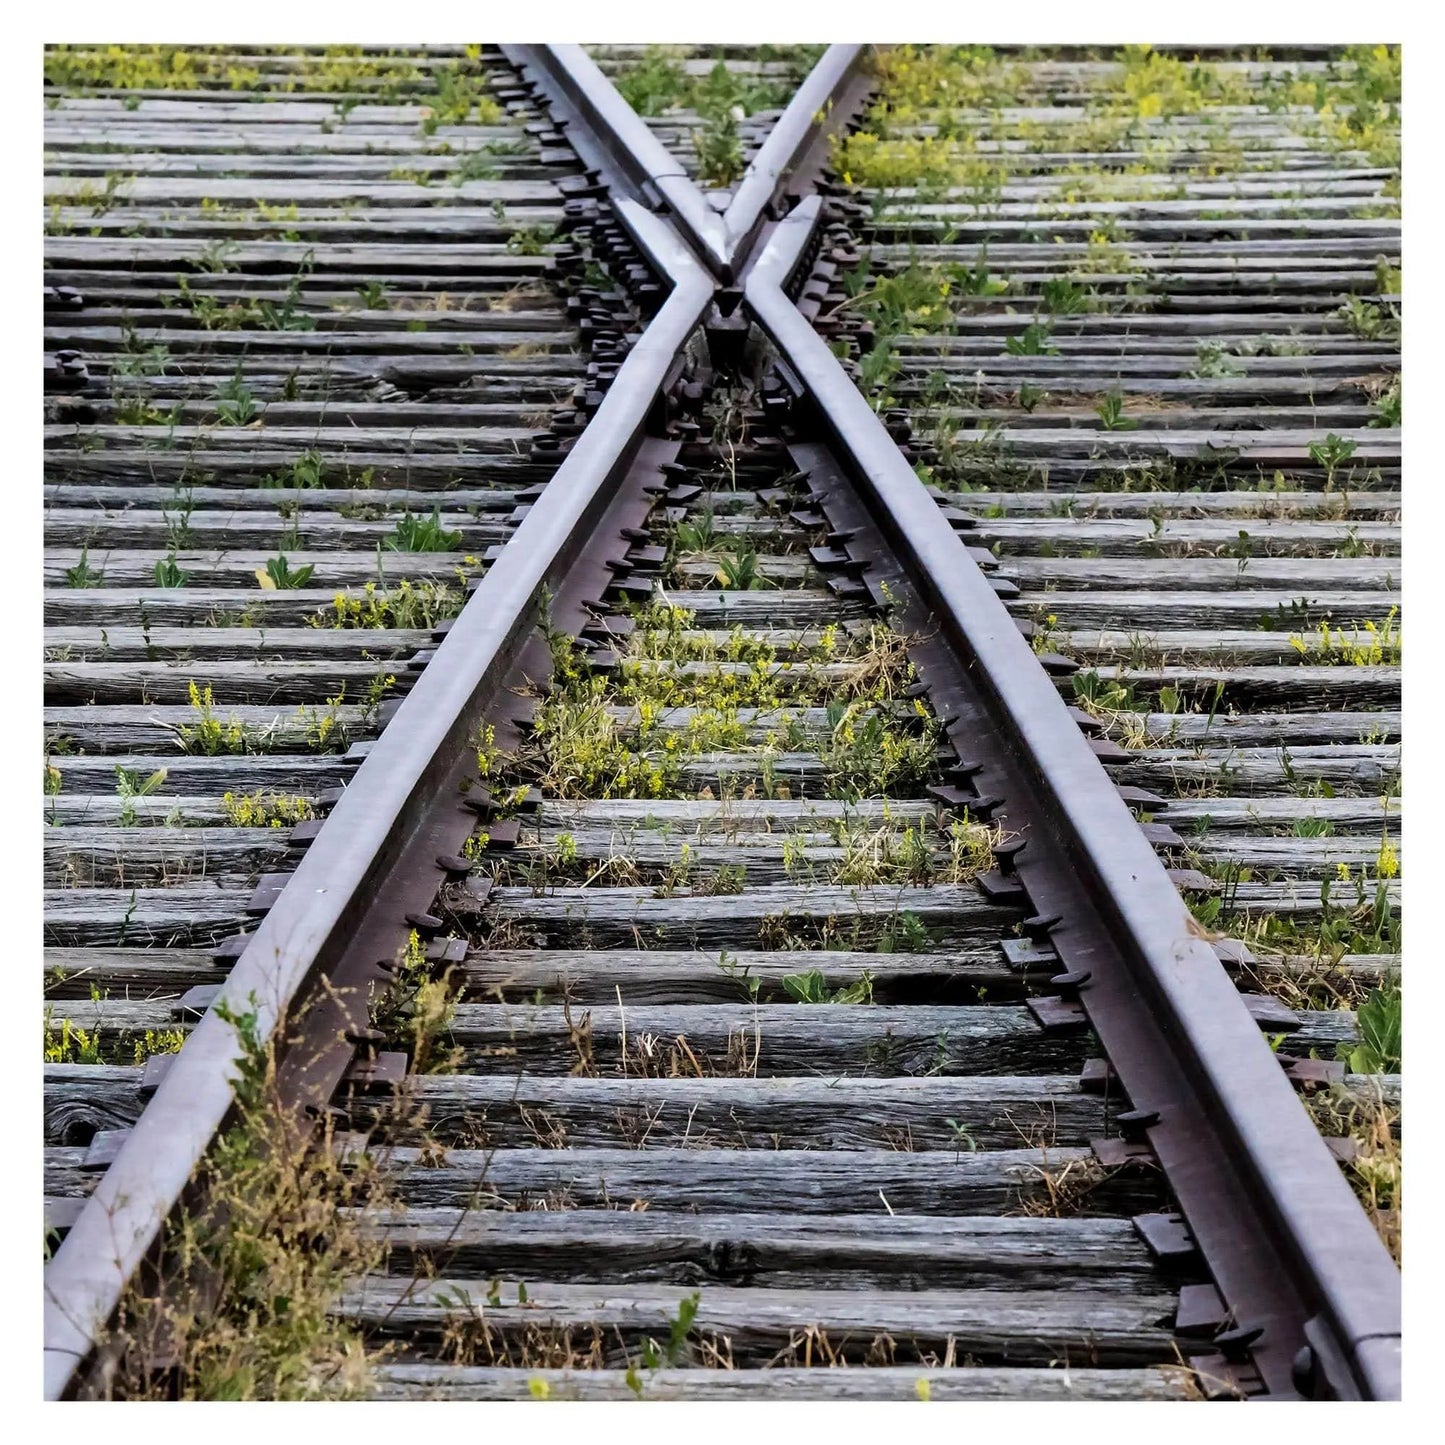 Train track in shape of X art on brushed metal home decor